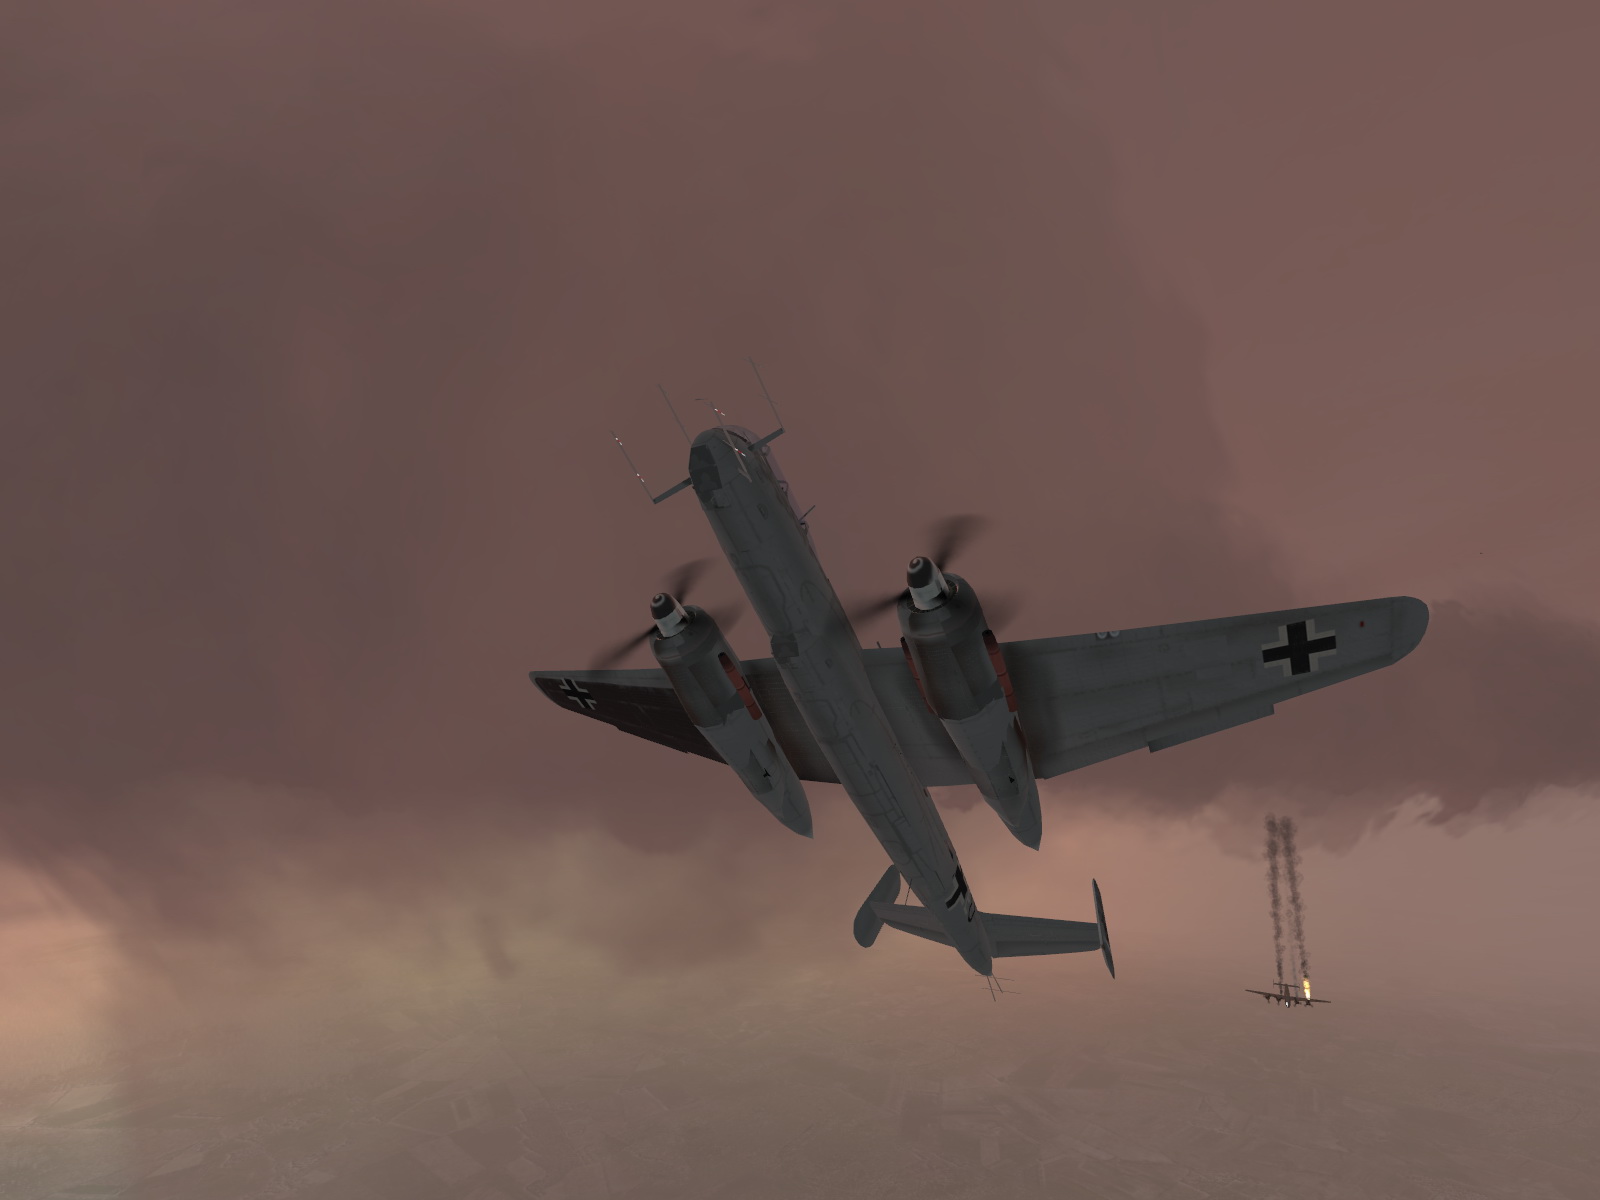 IL2 MH He 219A Nachtjager in aerial combat with a RAF Lancaster 07